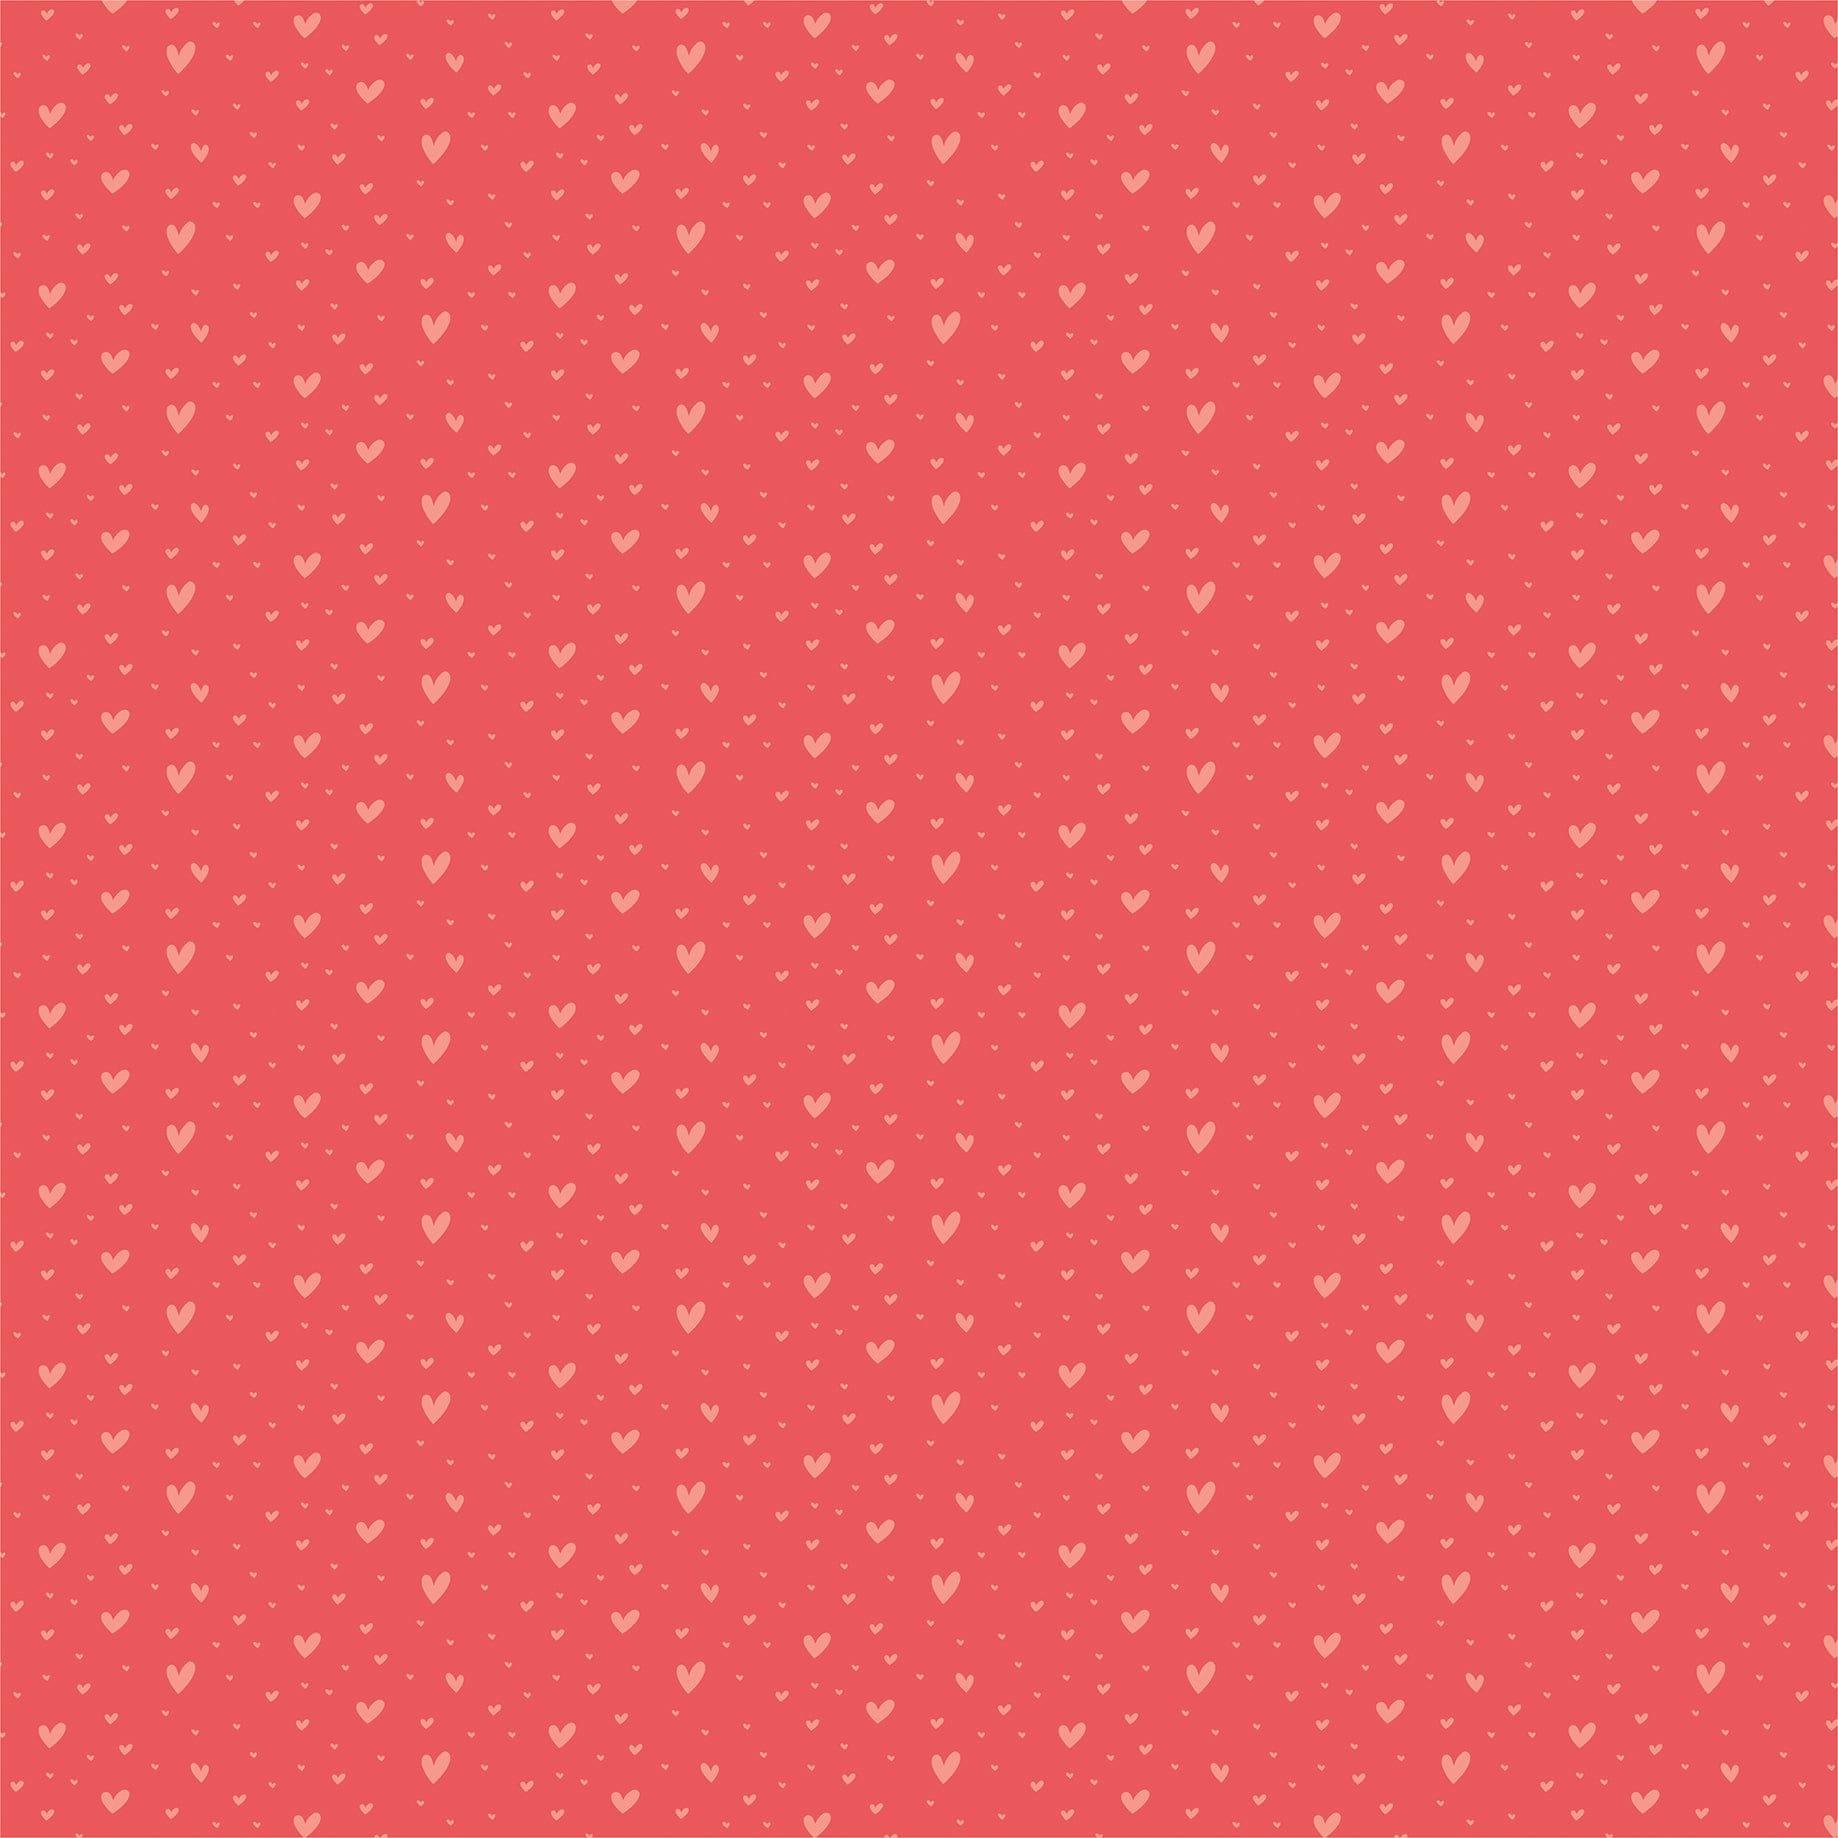 Little Dreamer Girl Collection You Are Magic 12 x 12 Double-Sided Scrapbook Paper by Echo Park Paper - Scrapbook Supply Companies